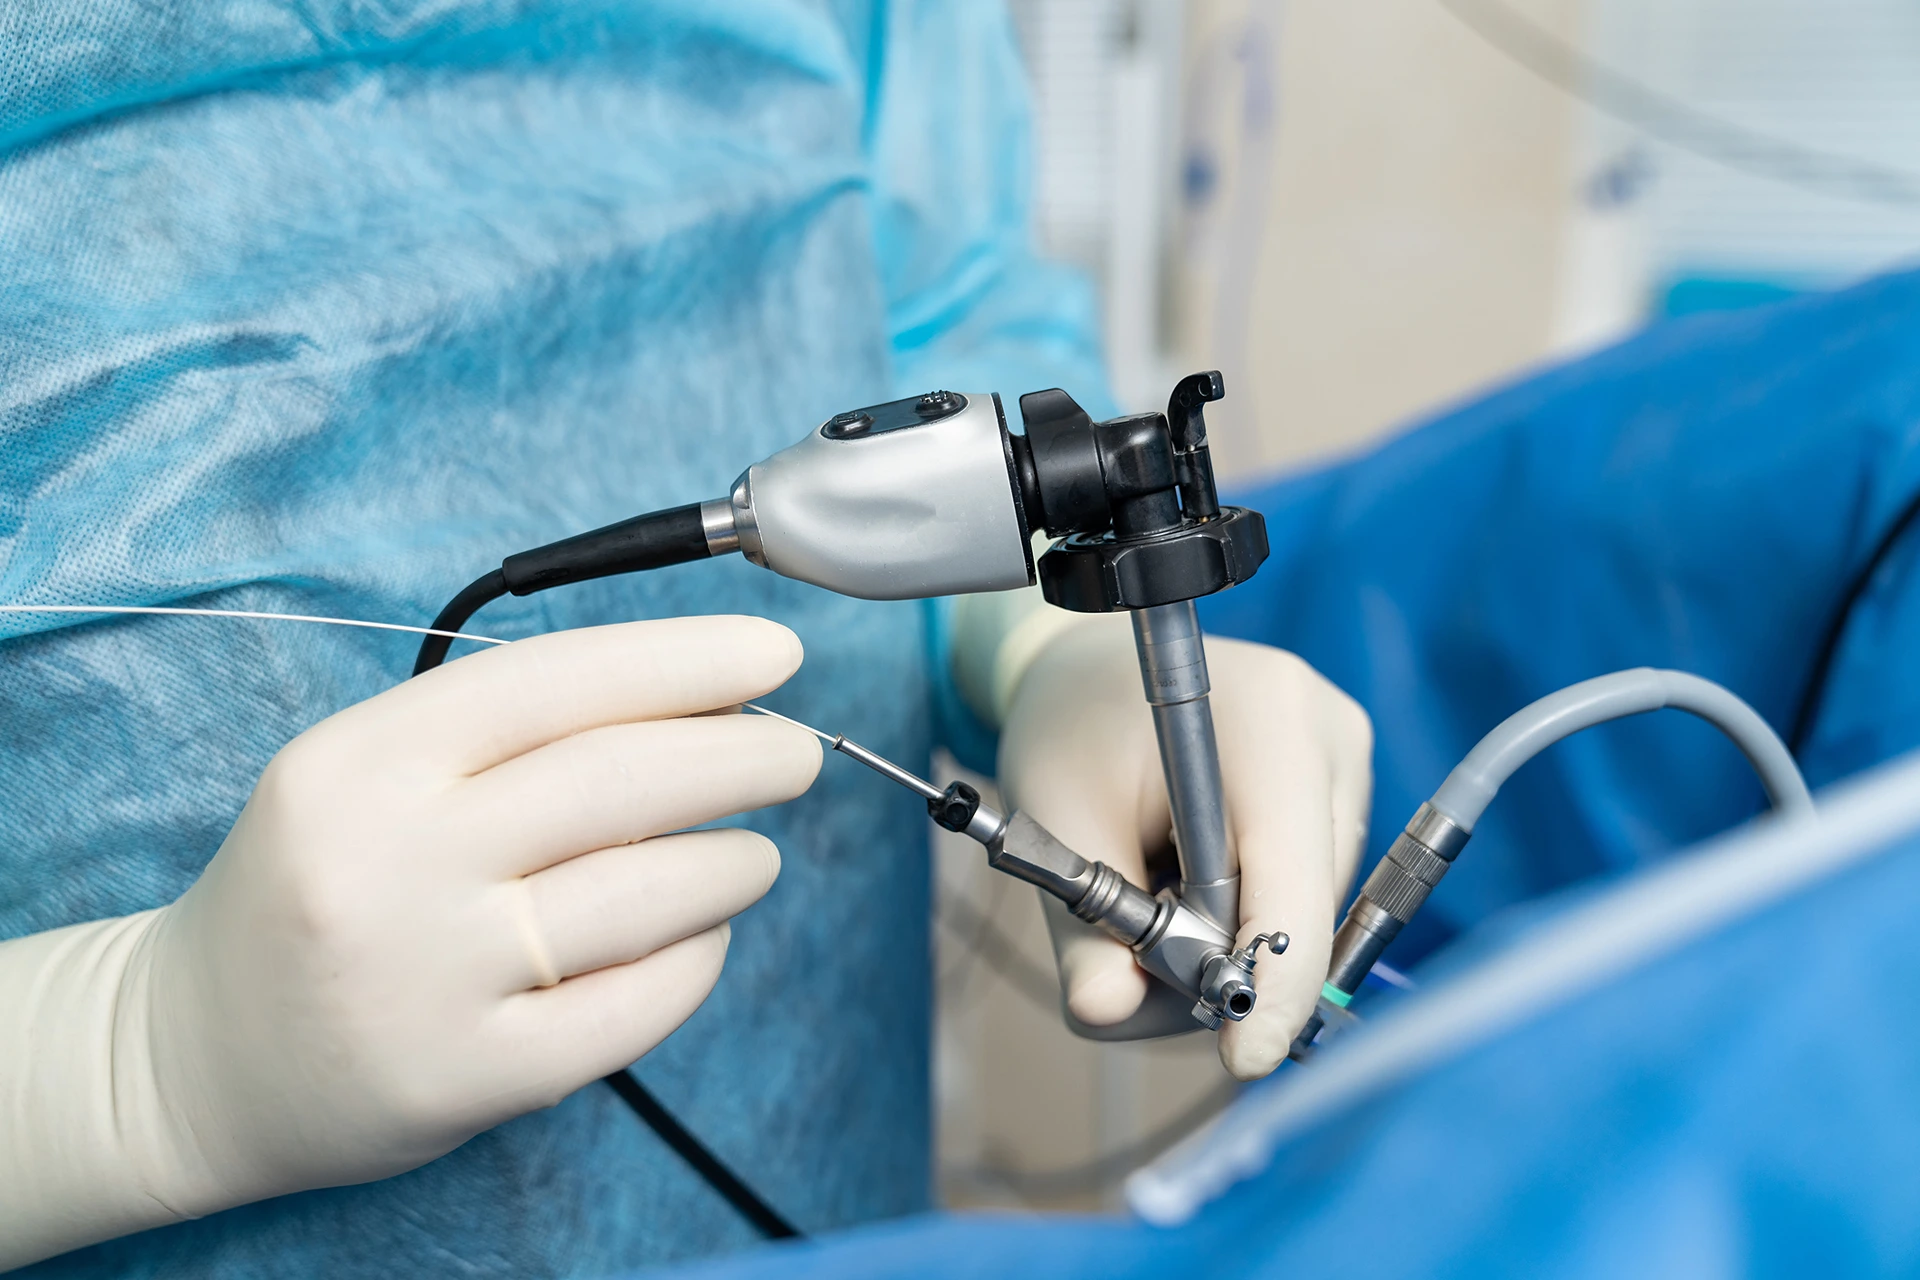 A healthcare professional in blue scrubs holding an endoscope during a medical procedure.